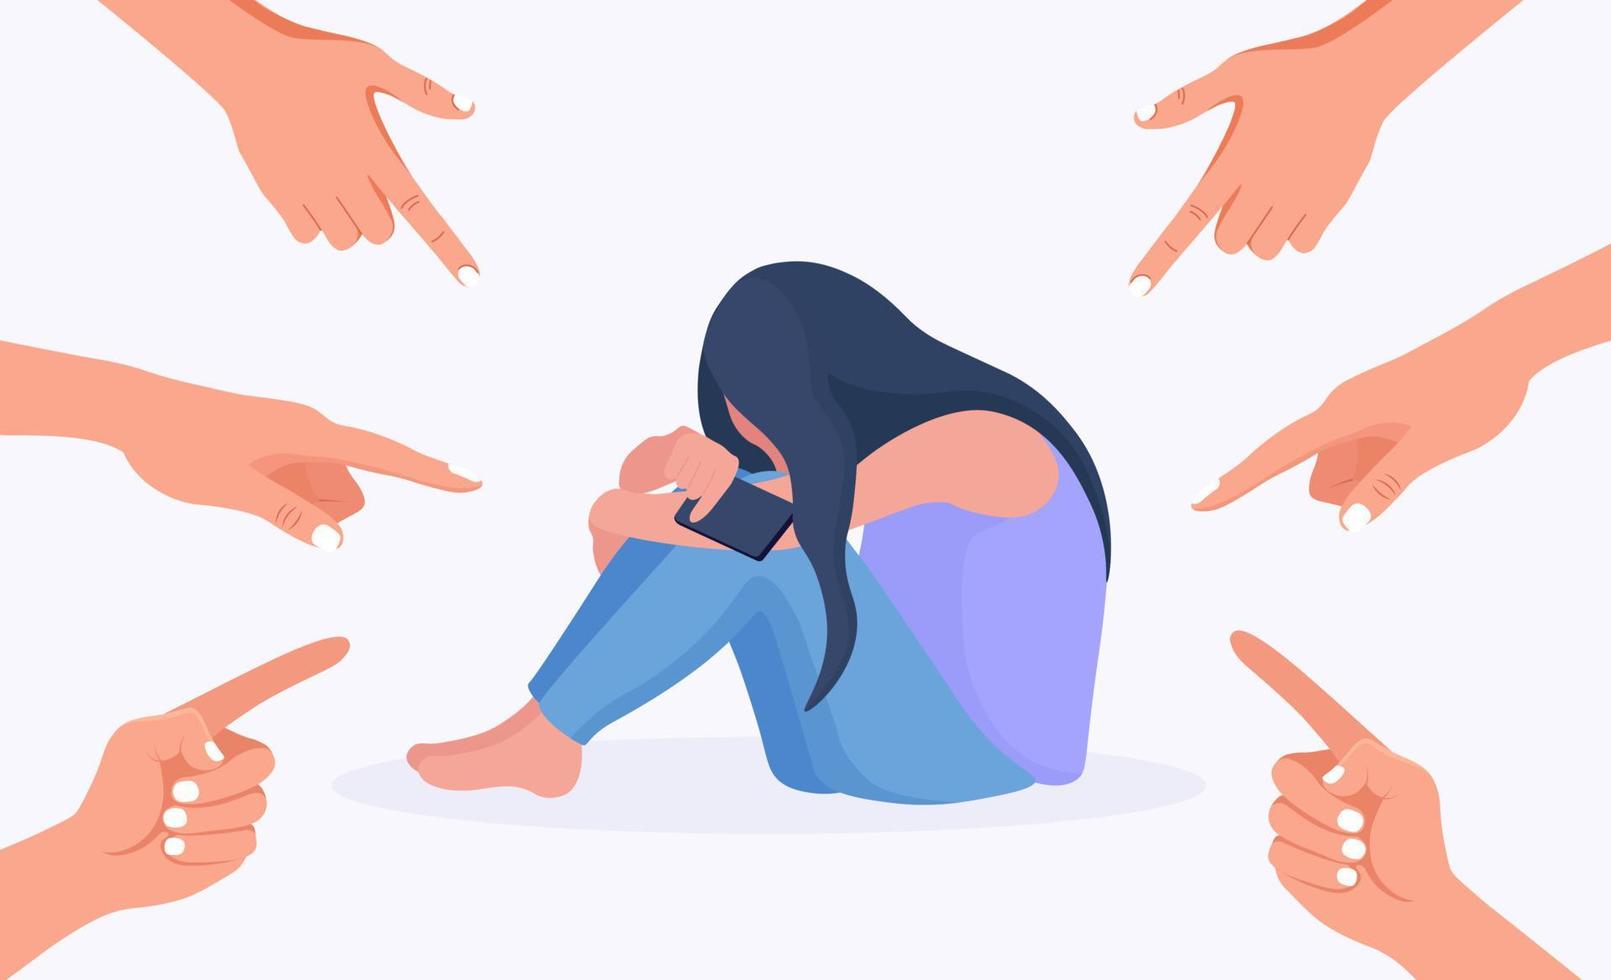 Sad or depressed young woman cries and covers her face. Girl surrounded by hands with index fingers pointing at her. Bullying, accusation, public censure and victim blaming concept vector